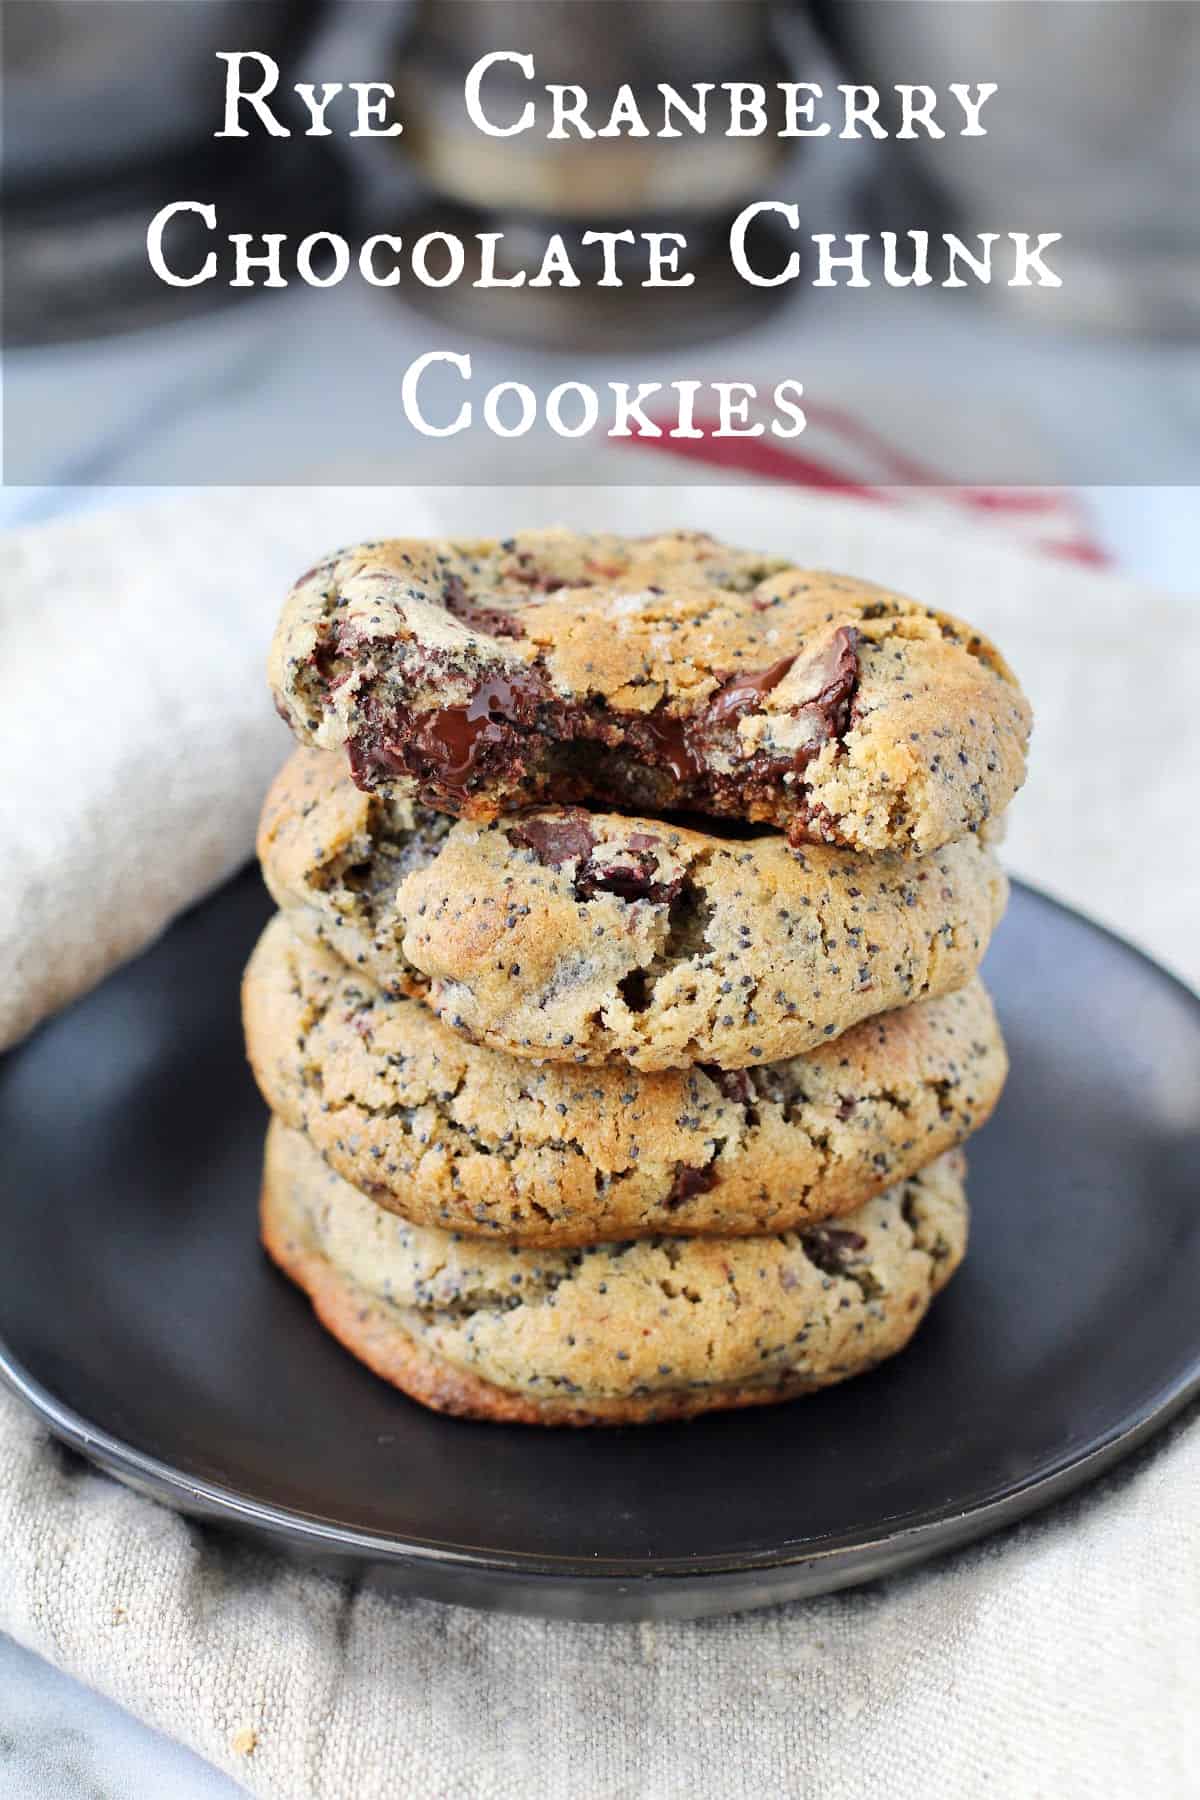 Rye Cranberry Chocolate Chunk Cookies stacked.